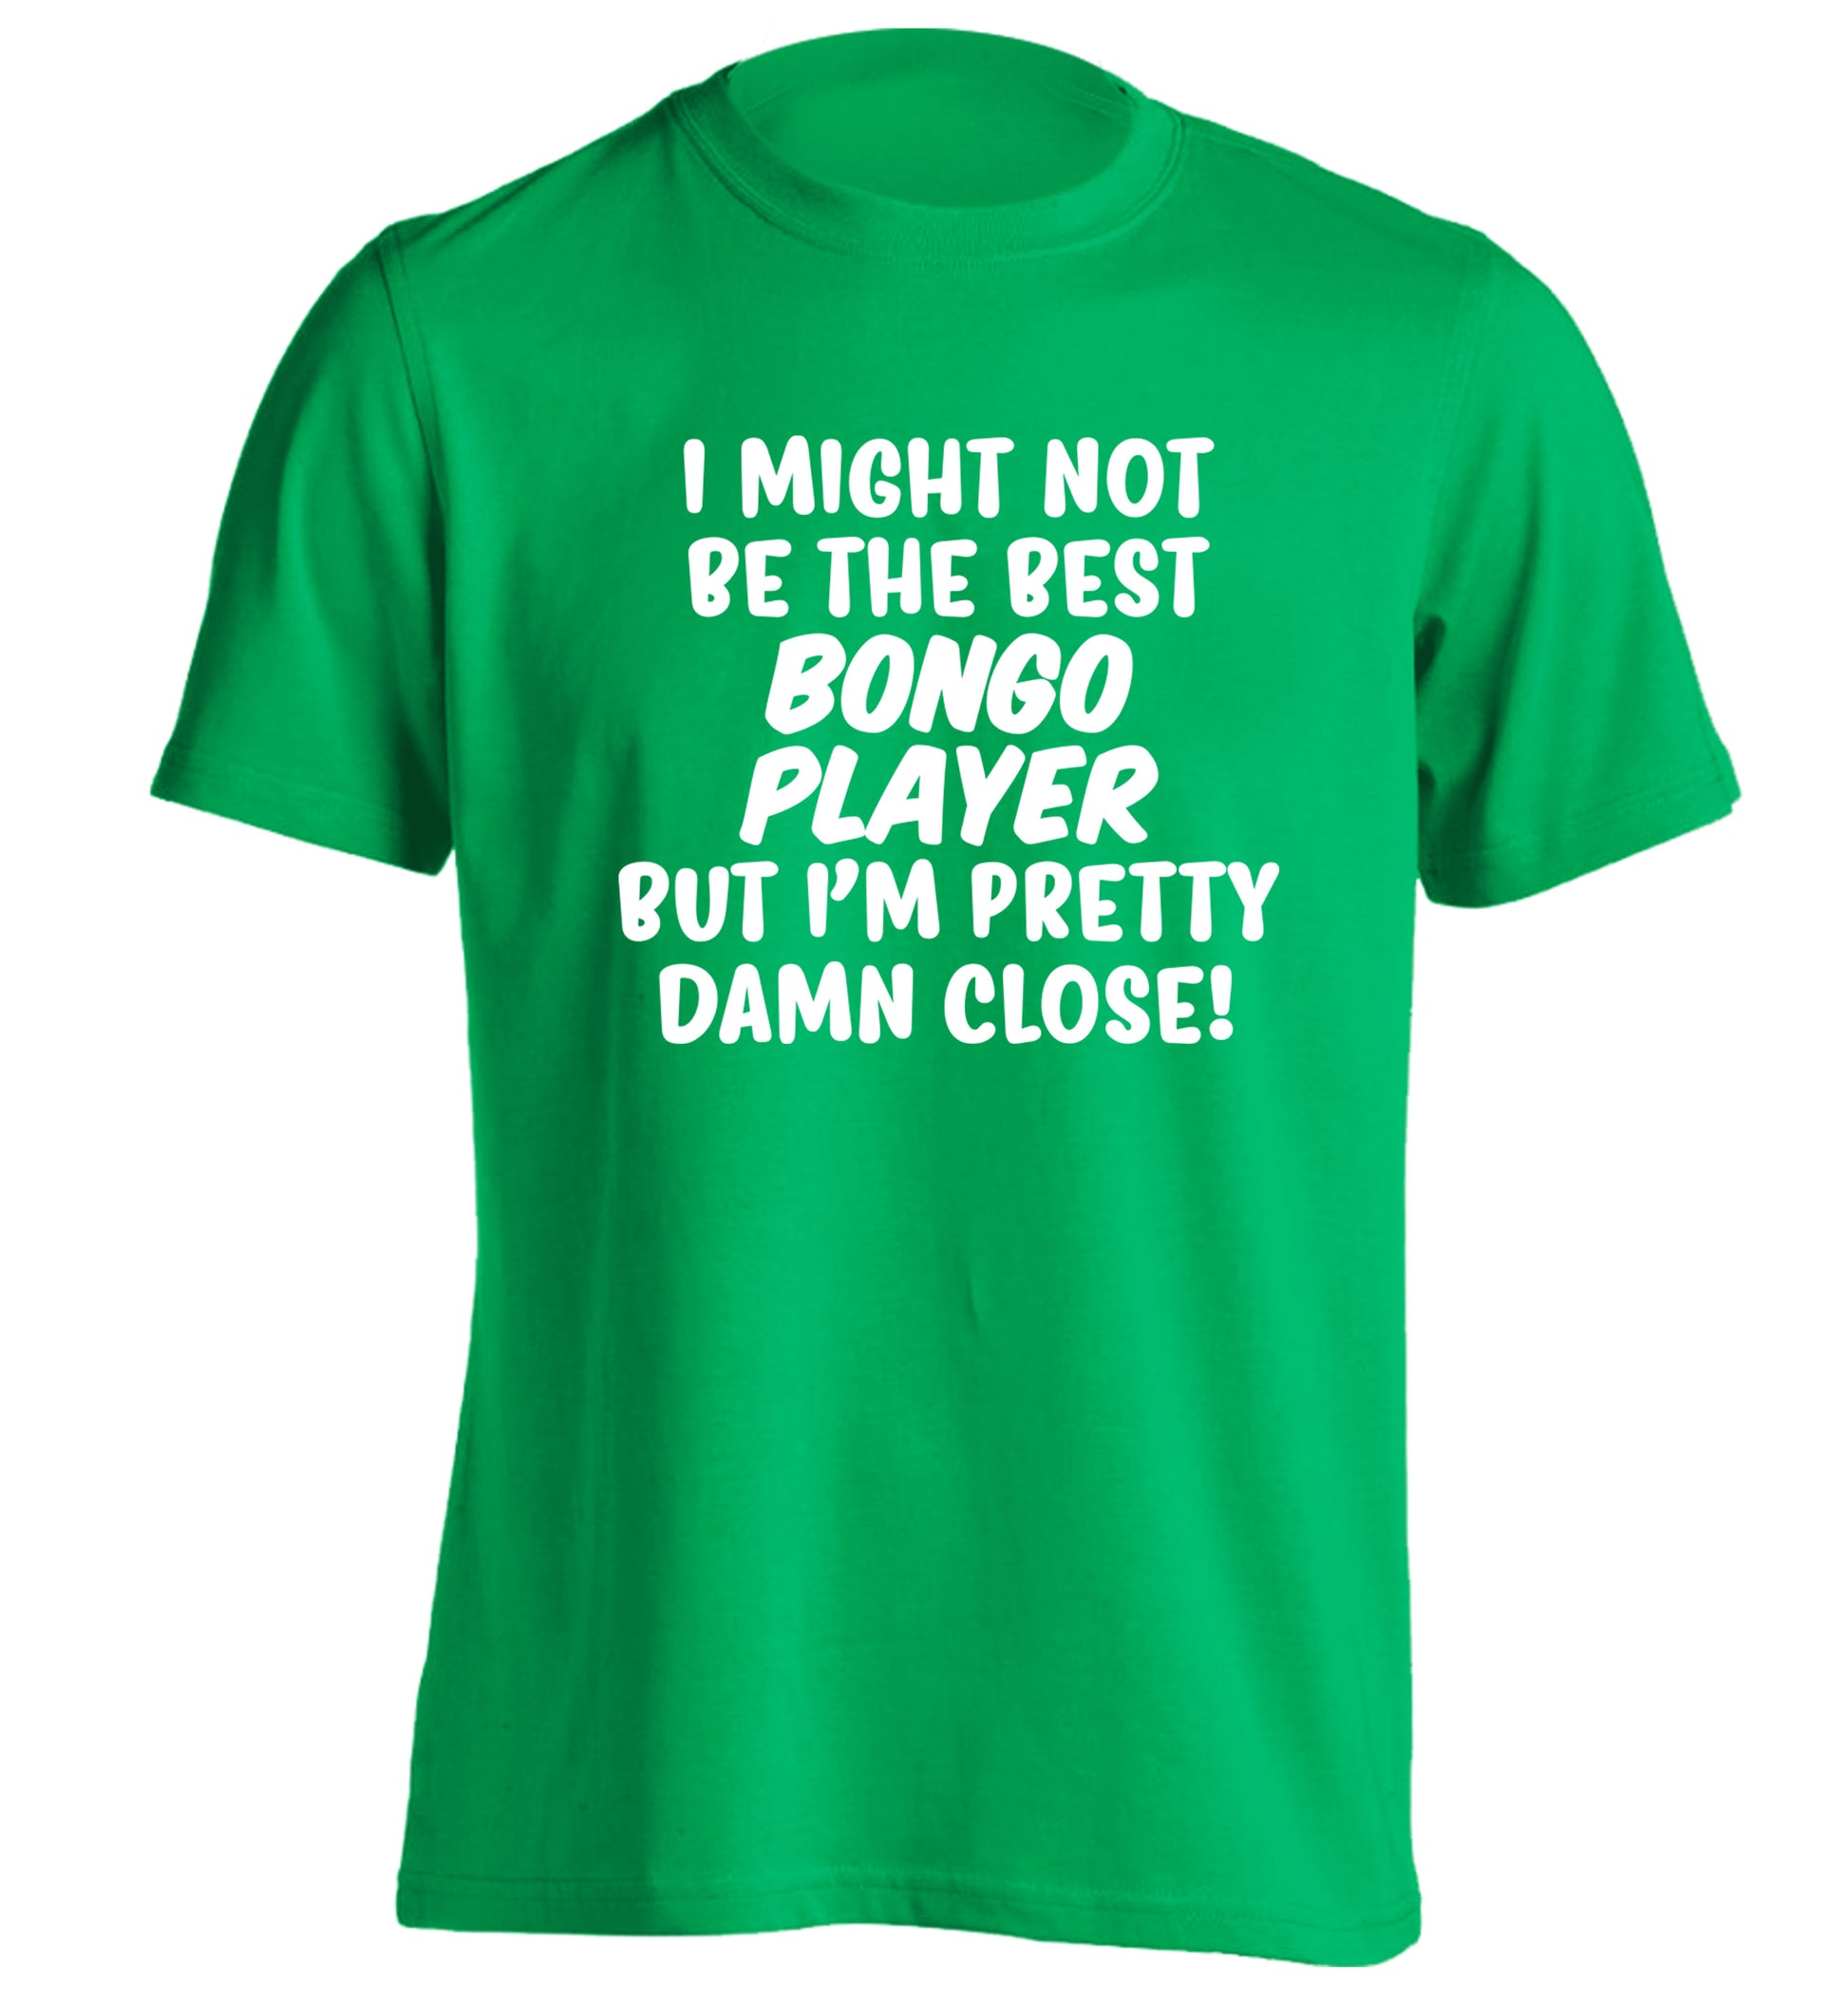 I might not be the best bongo player but I'm pretty close! adults unisexgreen Tshirt 2XL